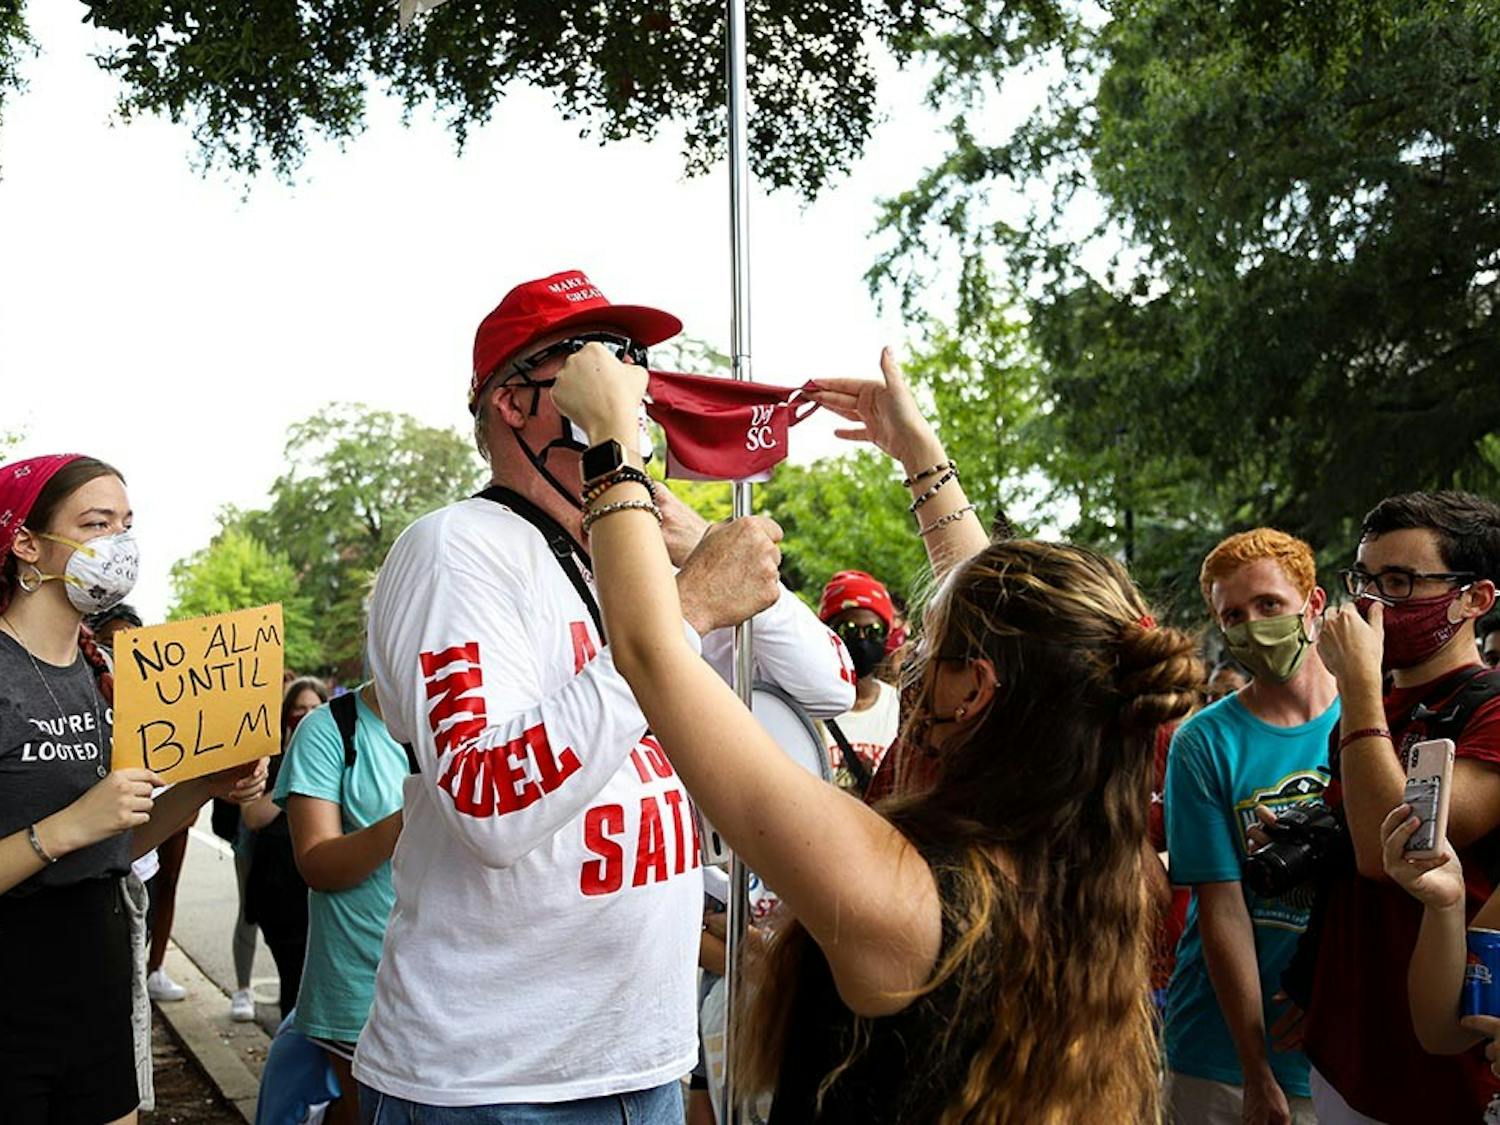 A student holds up a University of South Carolina face mask in attempt to cover Jim Gilles' “MAGA Fire Fauci” facemask. Jim Gilles took off his mask soon after.